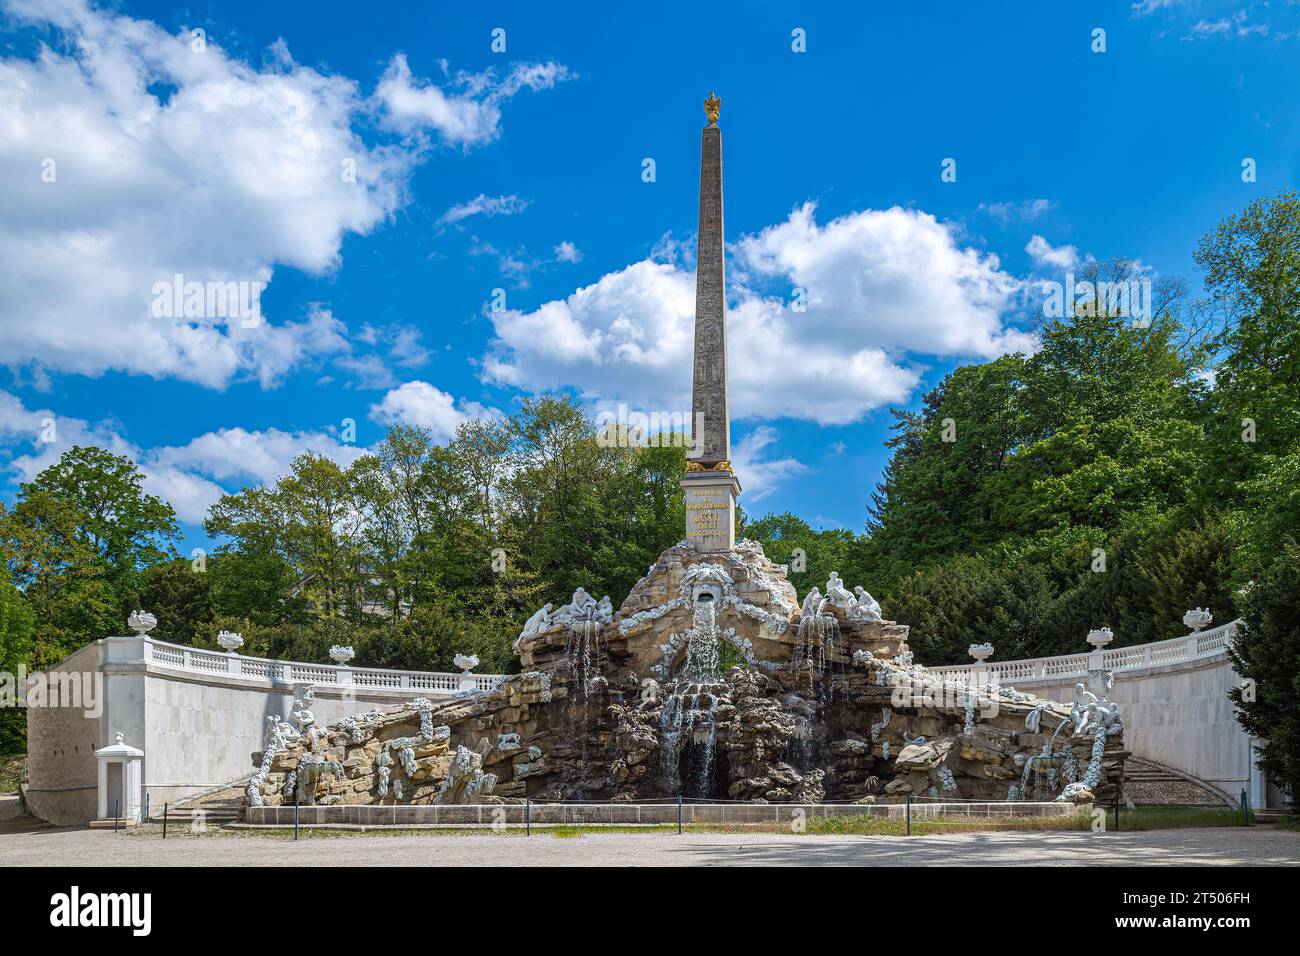 The Obelisk Fountain, known as the Sybill Grottoin, from the park of Schönbrunn Palace in Vienna. Lengt 35.6 m, width 24.0 m, height 31.3 m. Built in Stock Photo